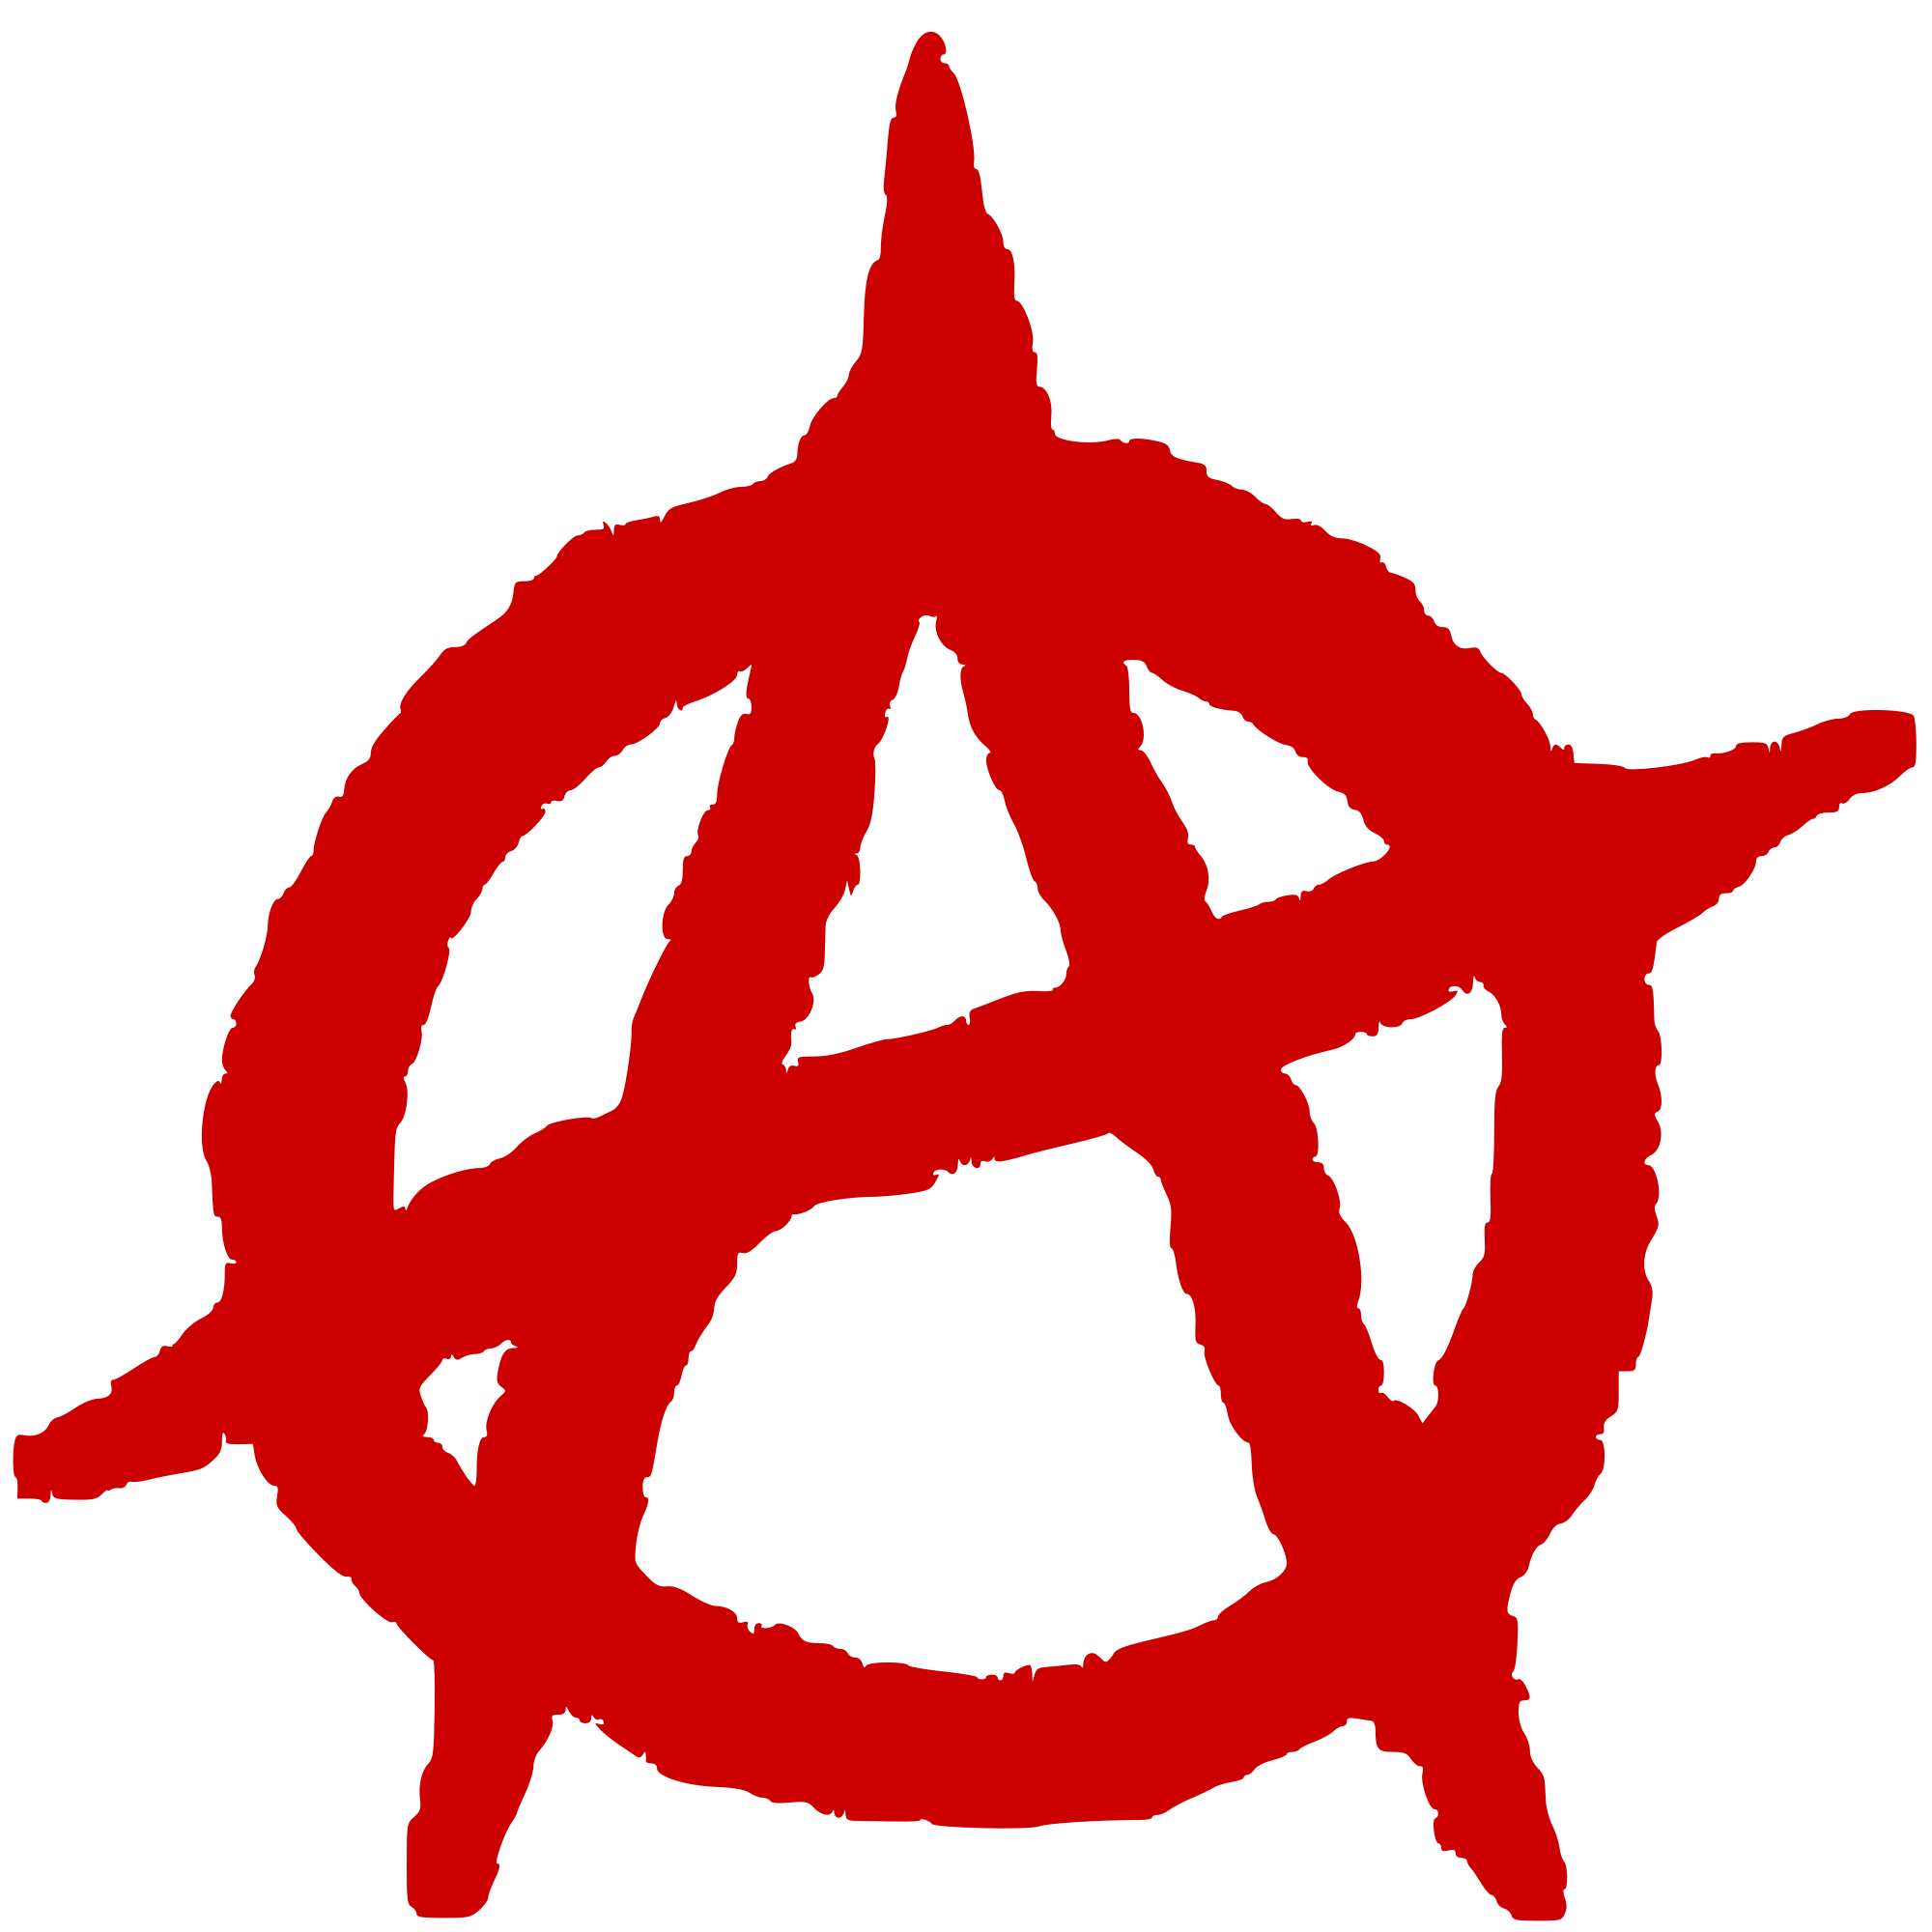 File:Circle-A red.svg - Wikimedia Commons